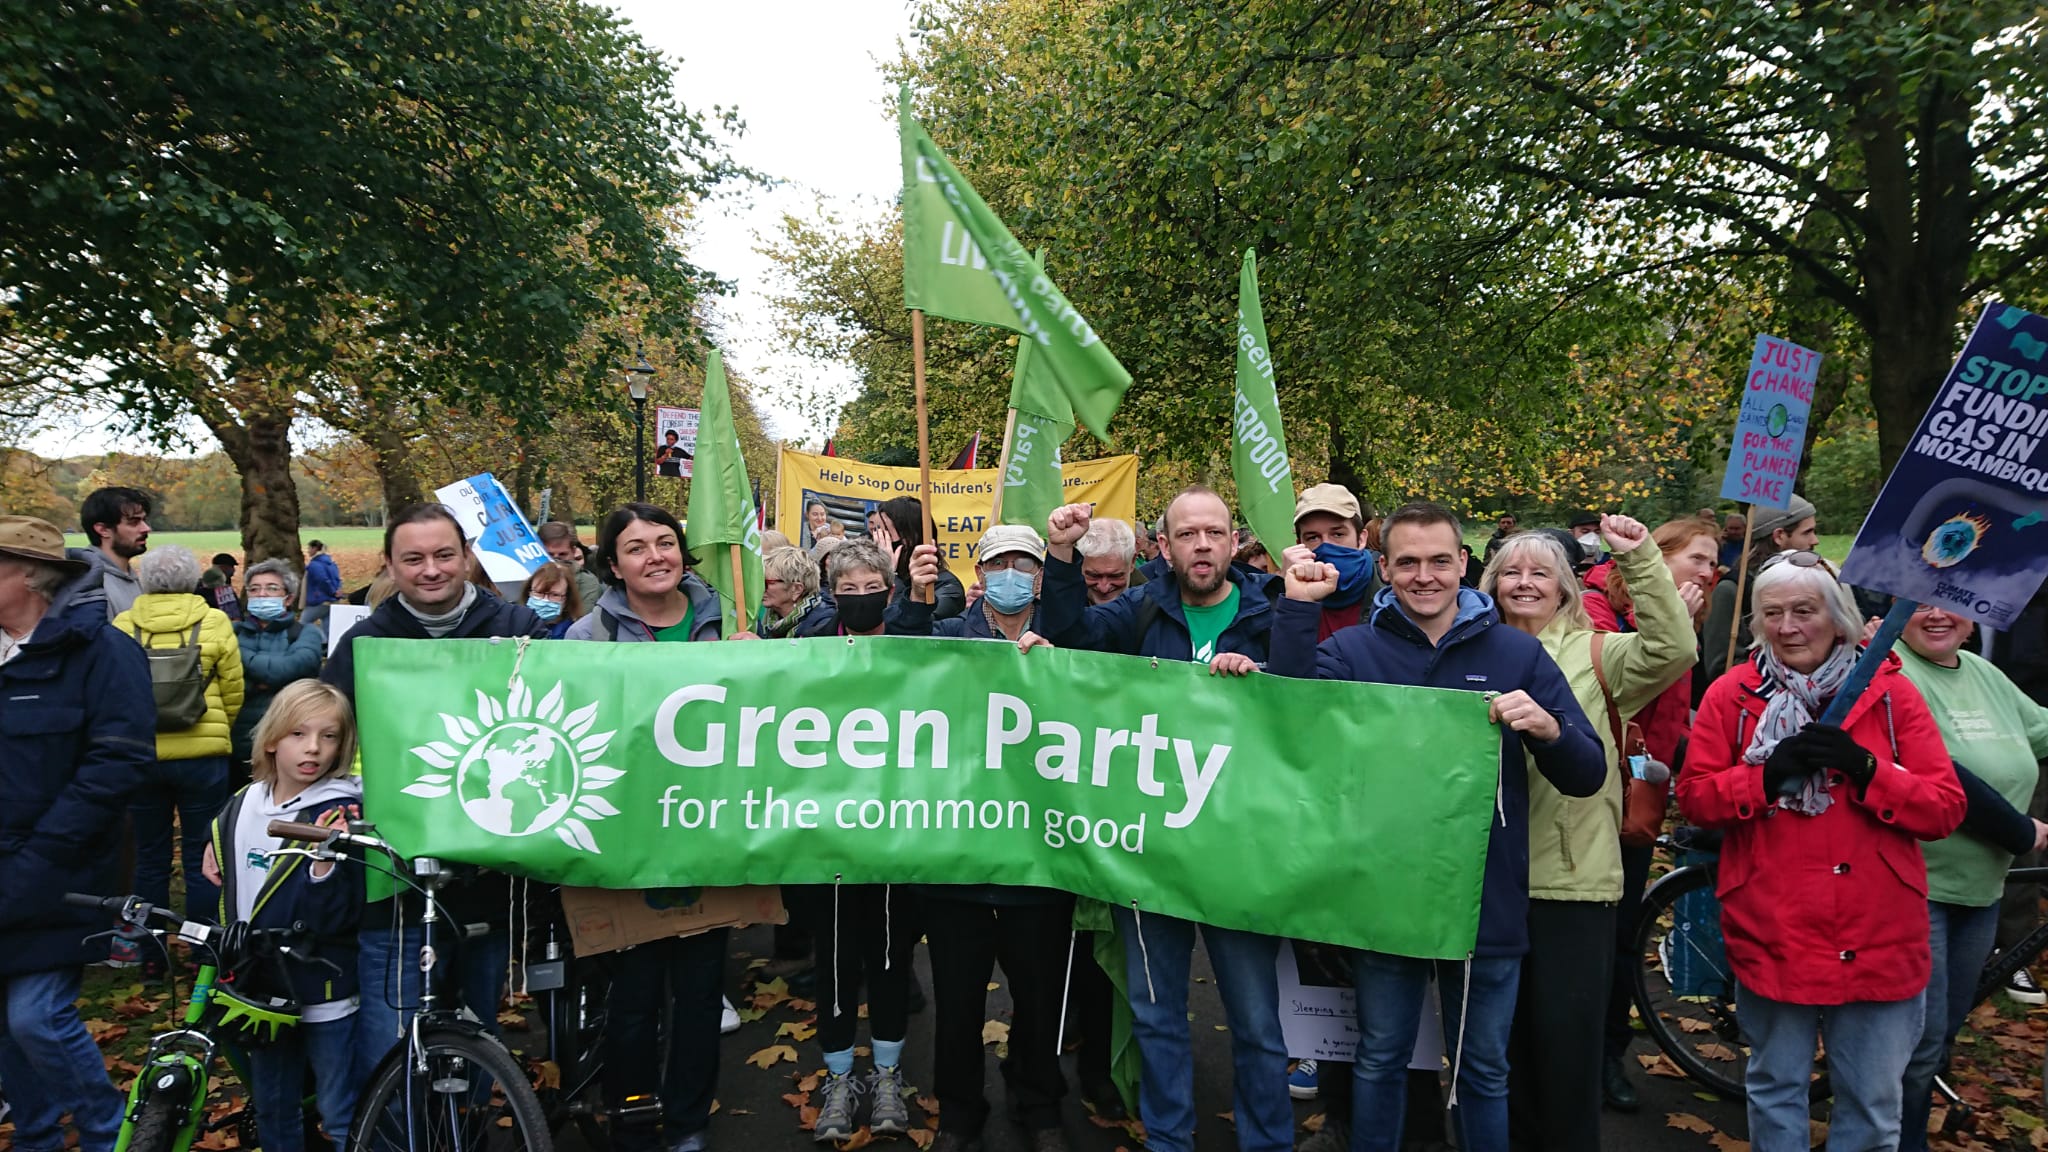 Liverpool Green Party